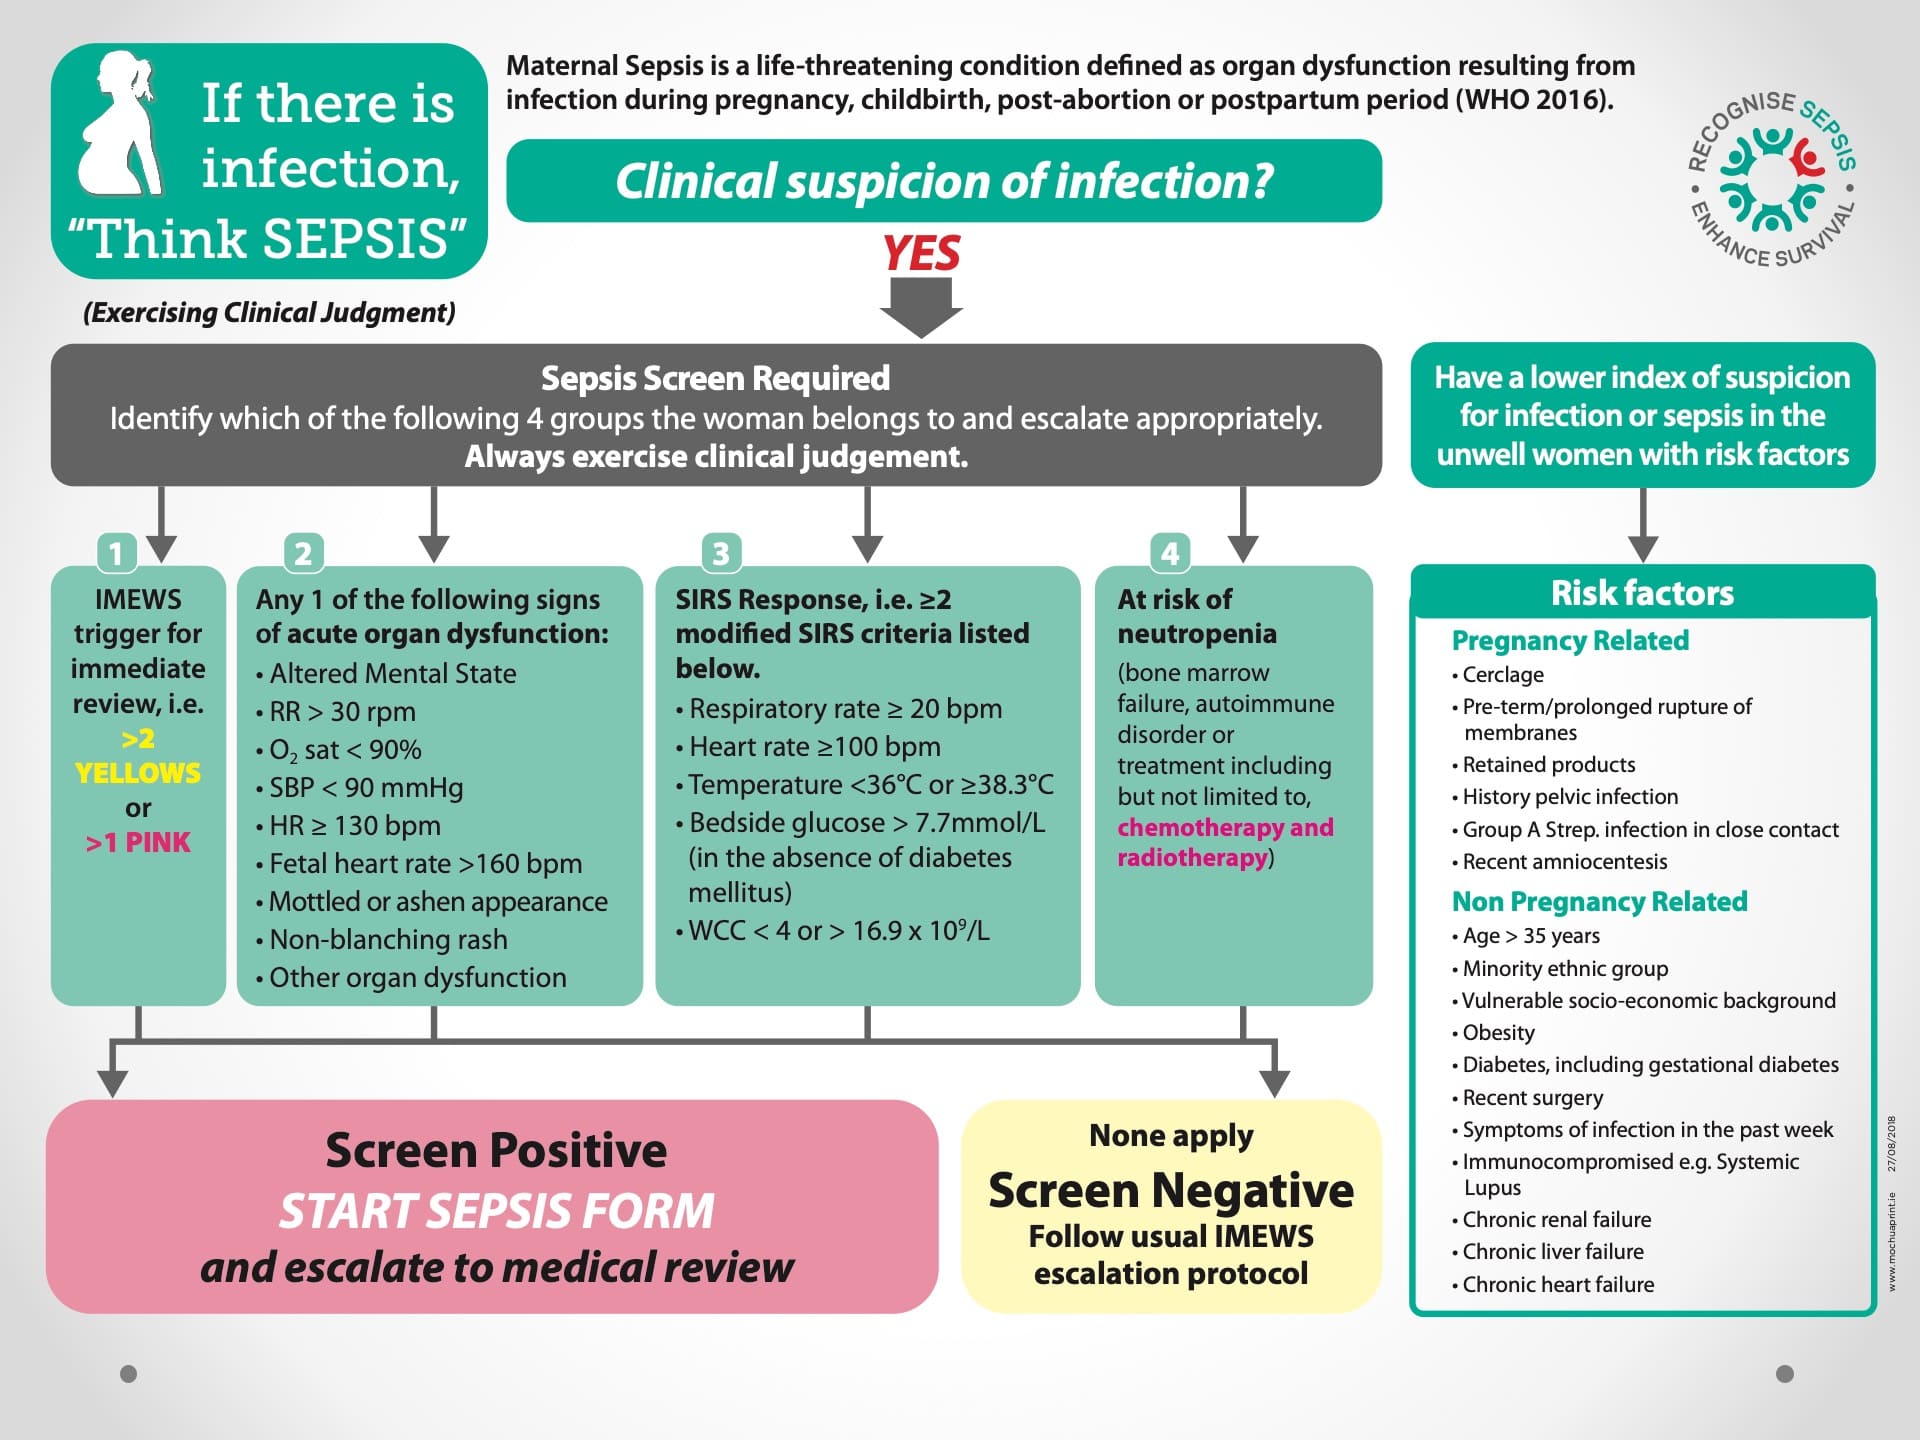 The National Sepsis Plan in Ireland5.jpeg